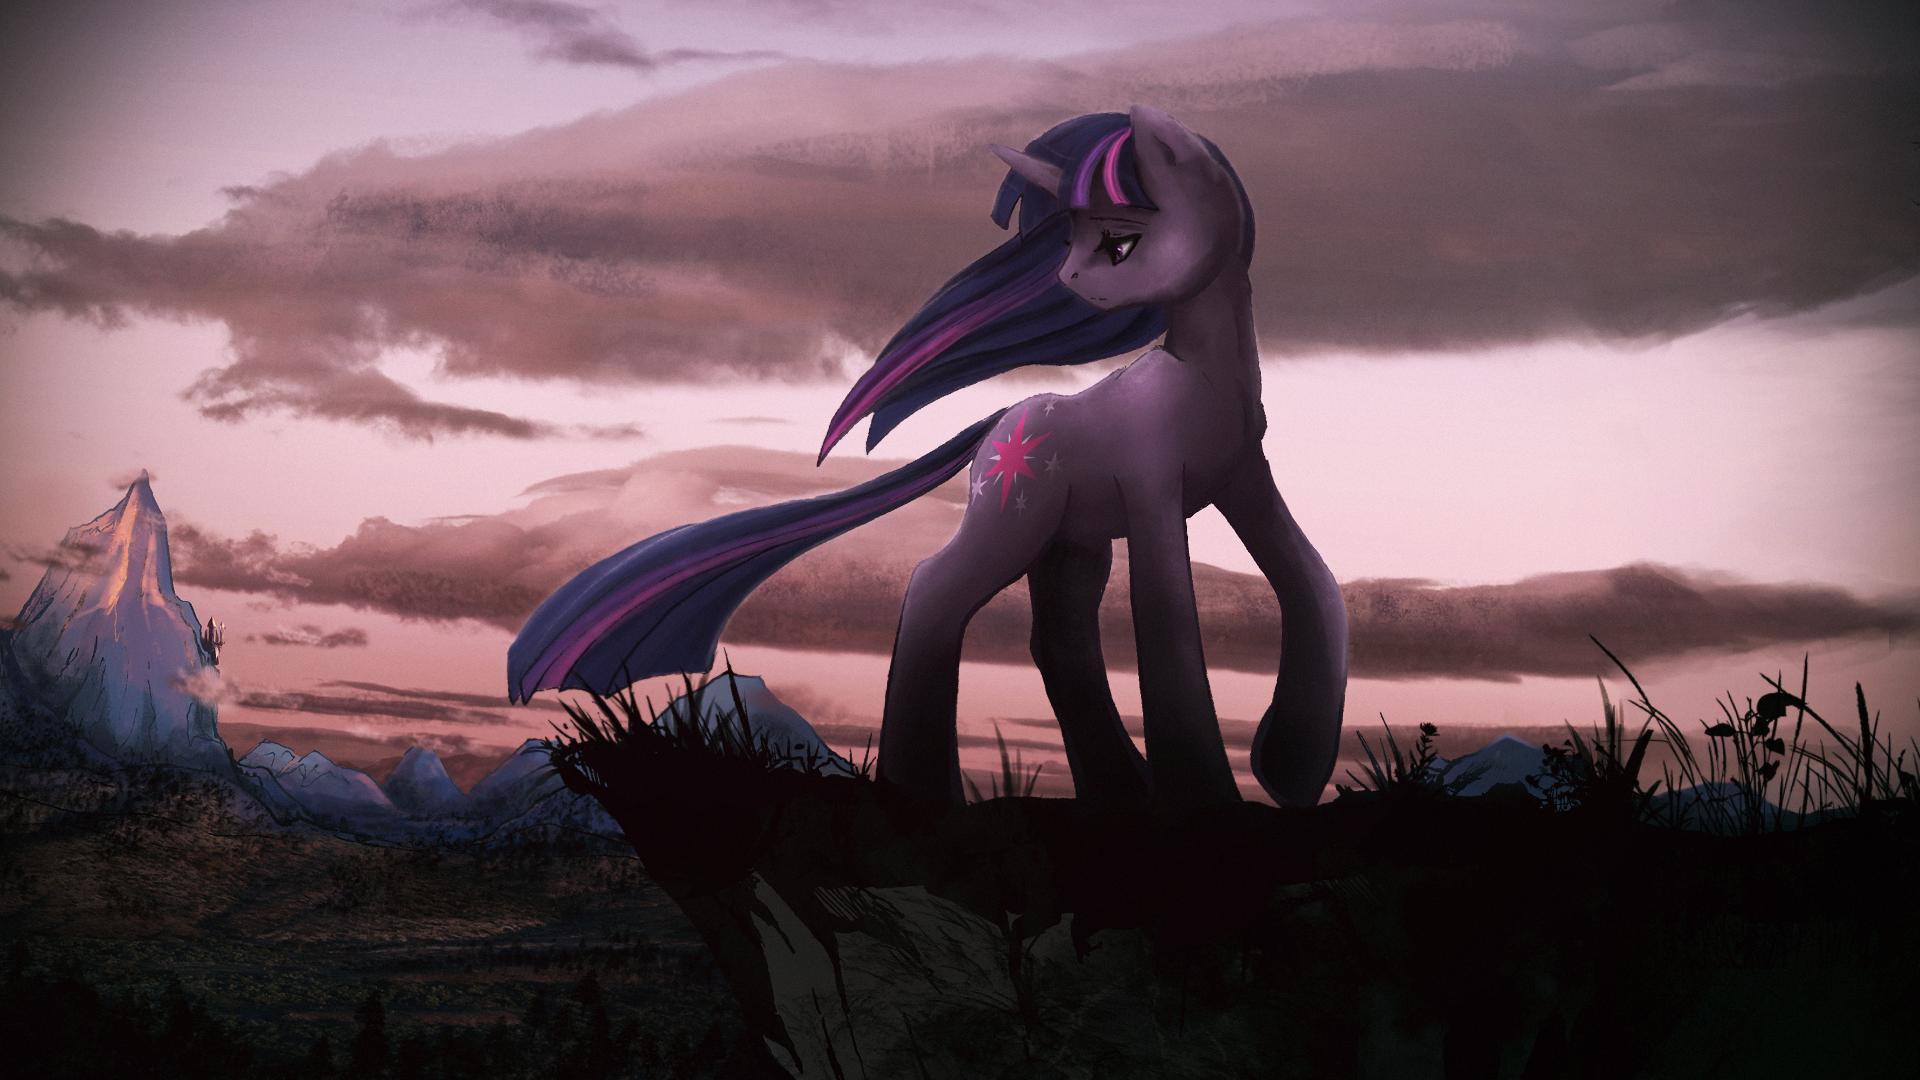 wallpaper - dramatic Twilight by CosmicUnicorn